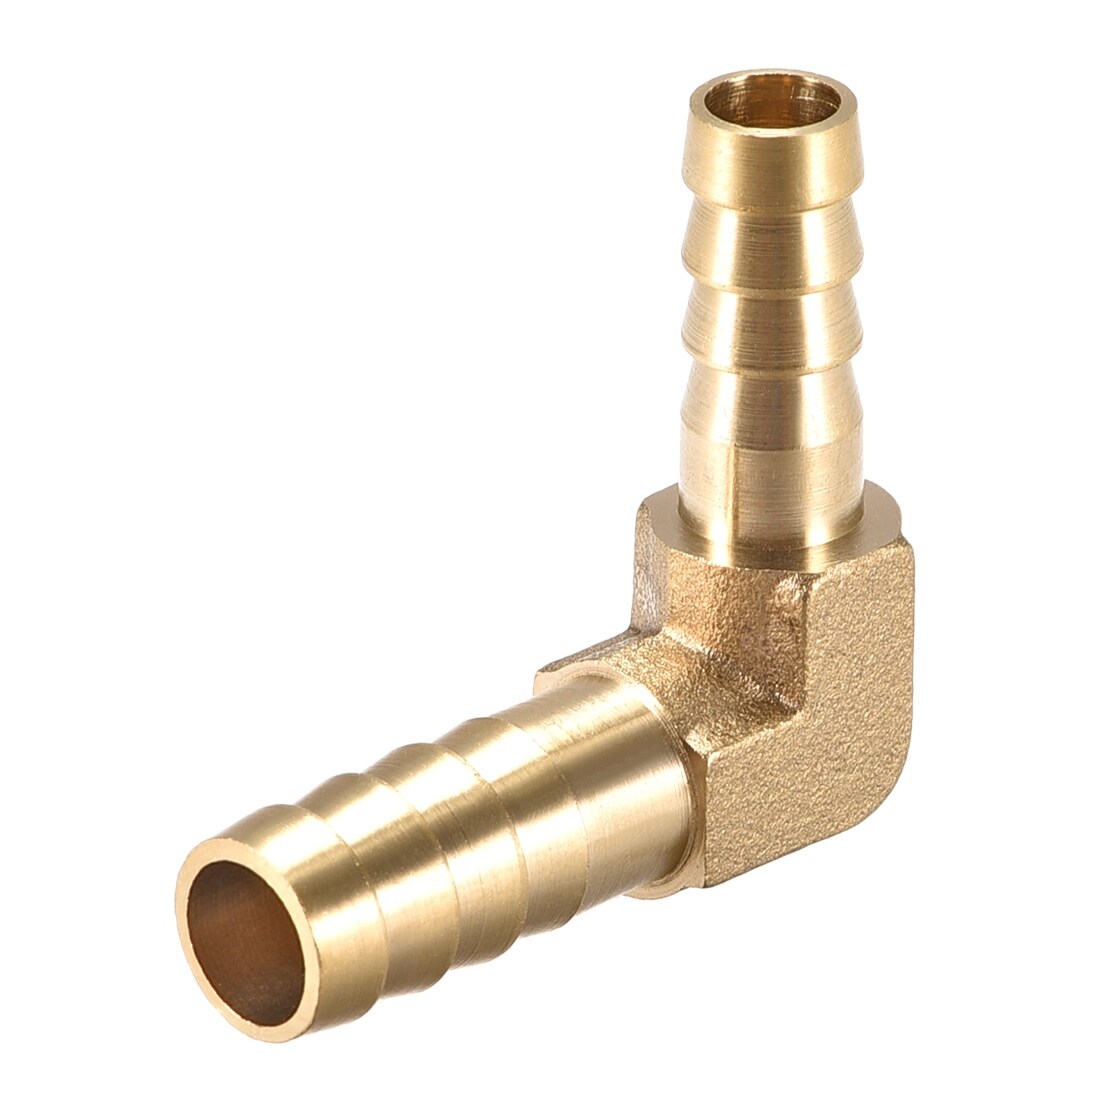 Pipe Fittings Brass Barb Hose Fitting Connector Adapter 8mm Barbed x 1/2 PT Female Pipe 5pcs 